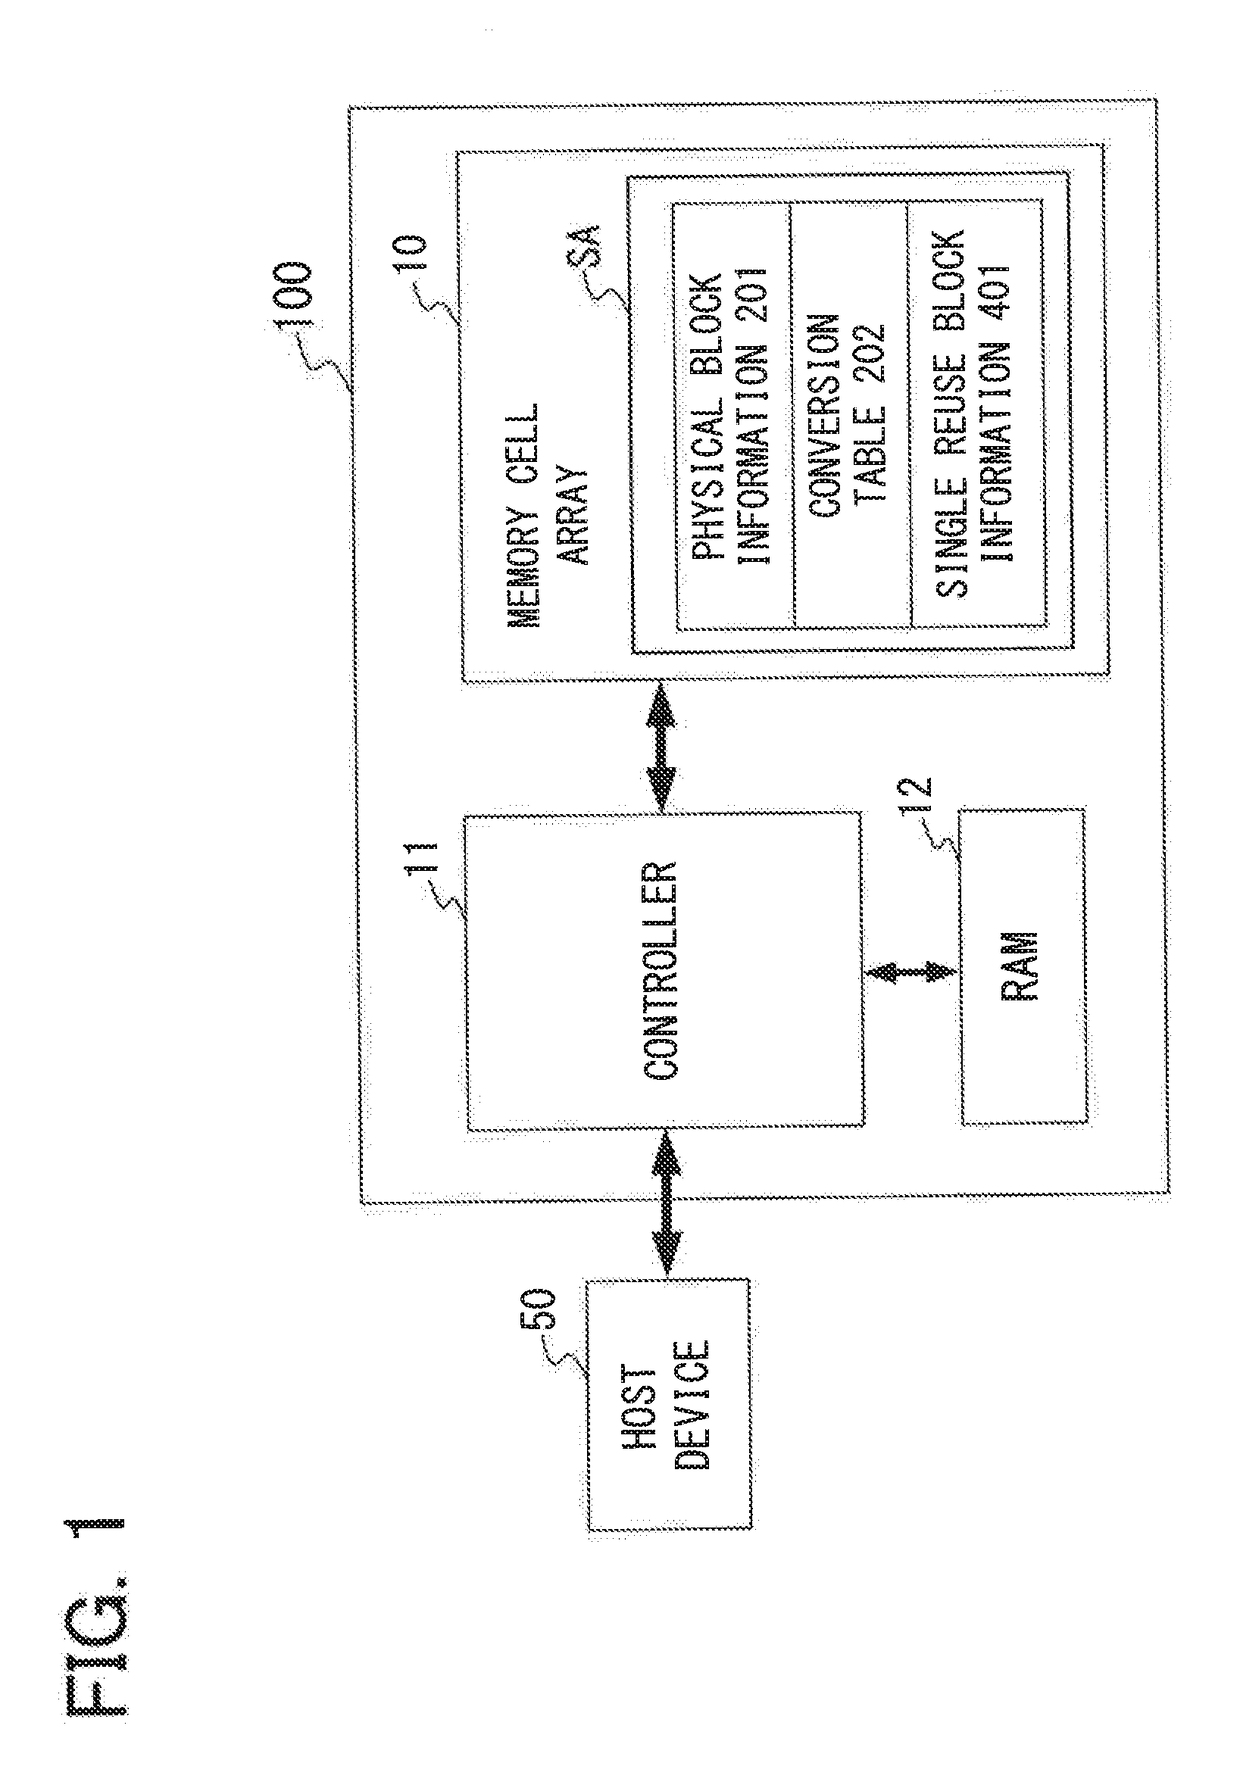 Memory system, memory management method and semiconductor device